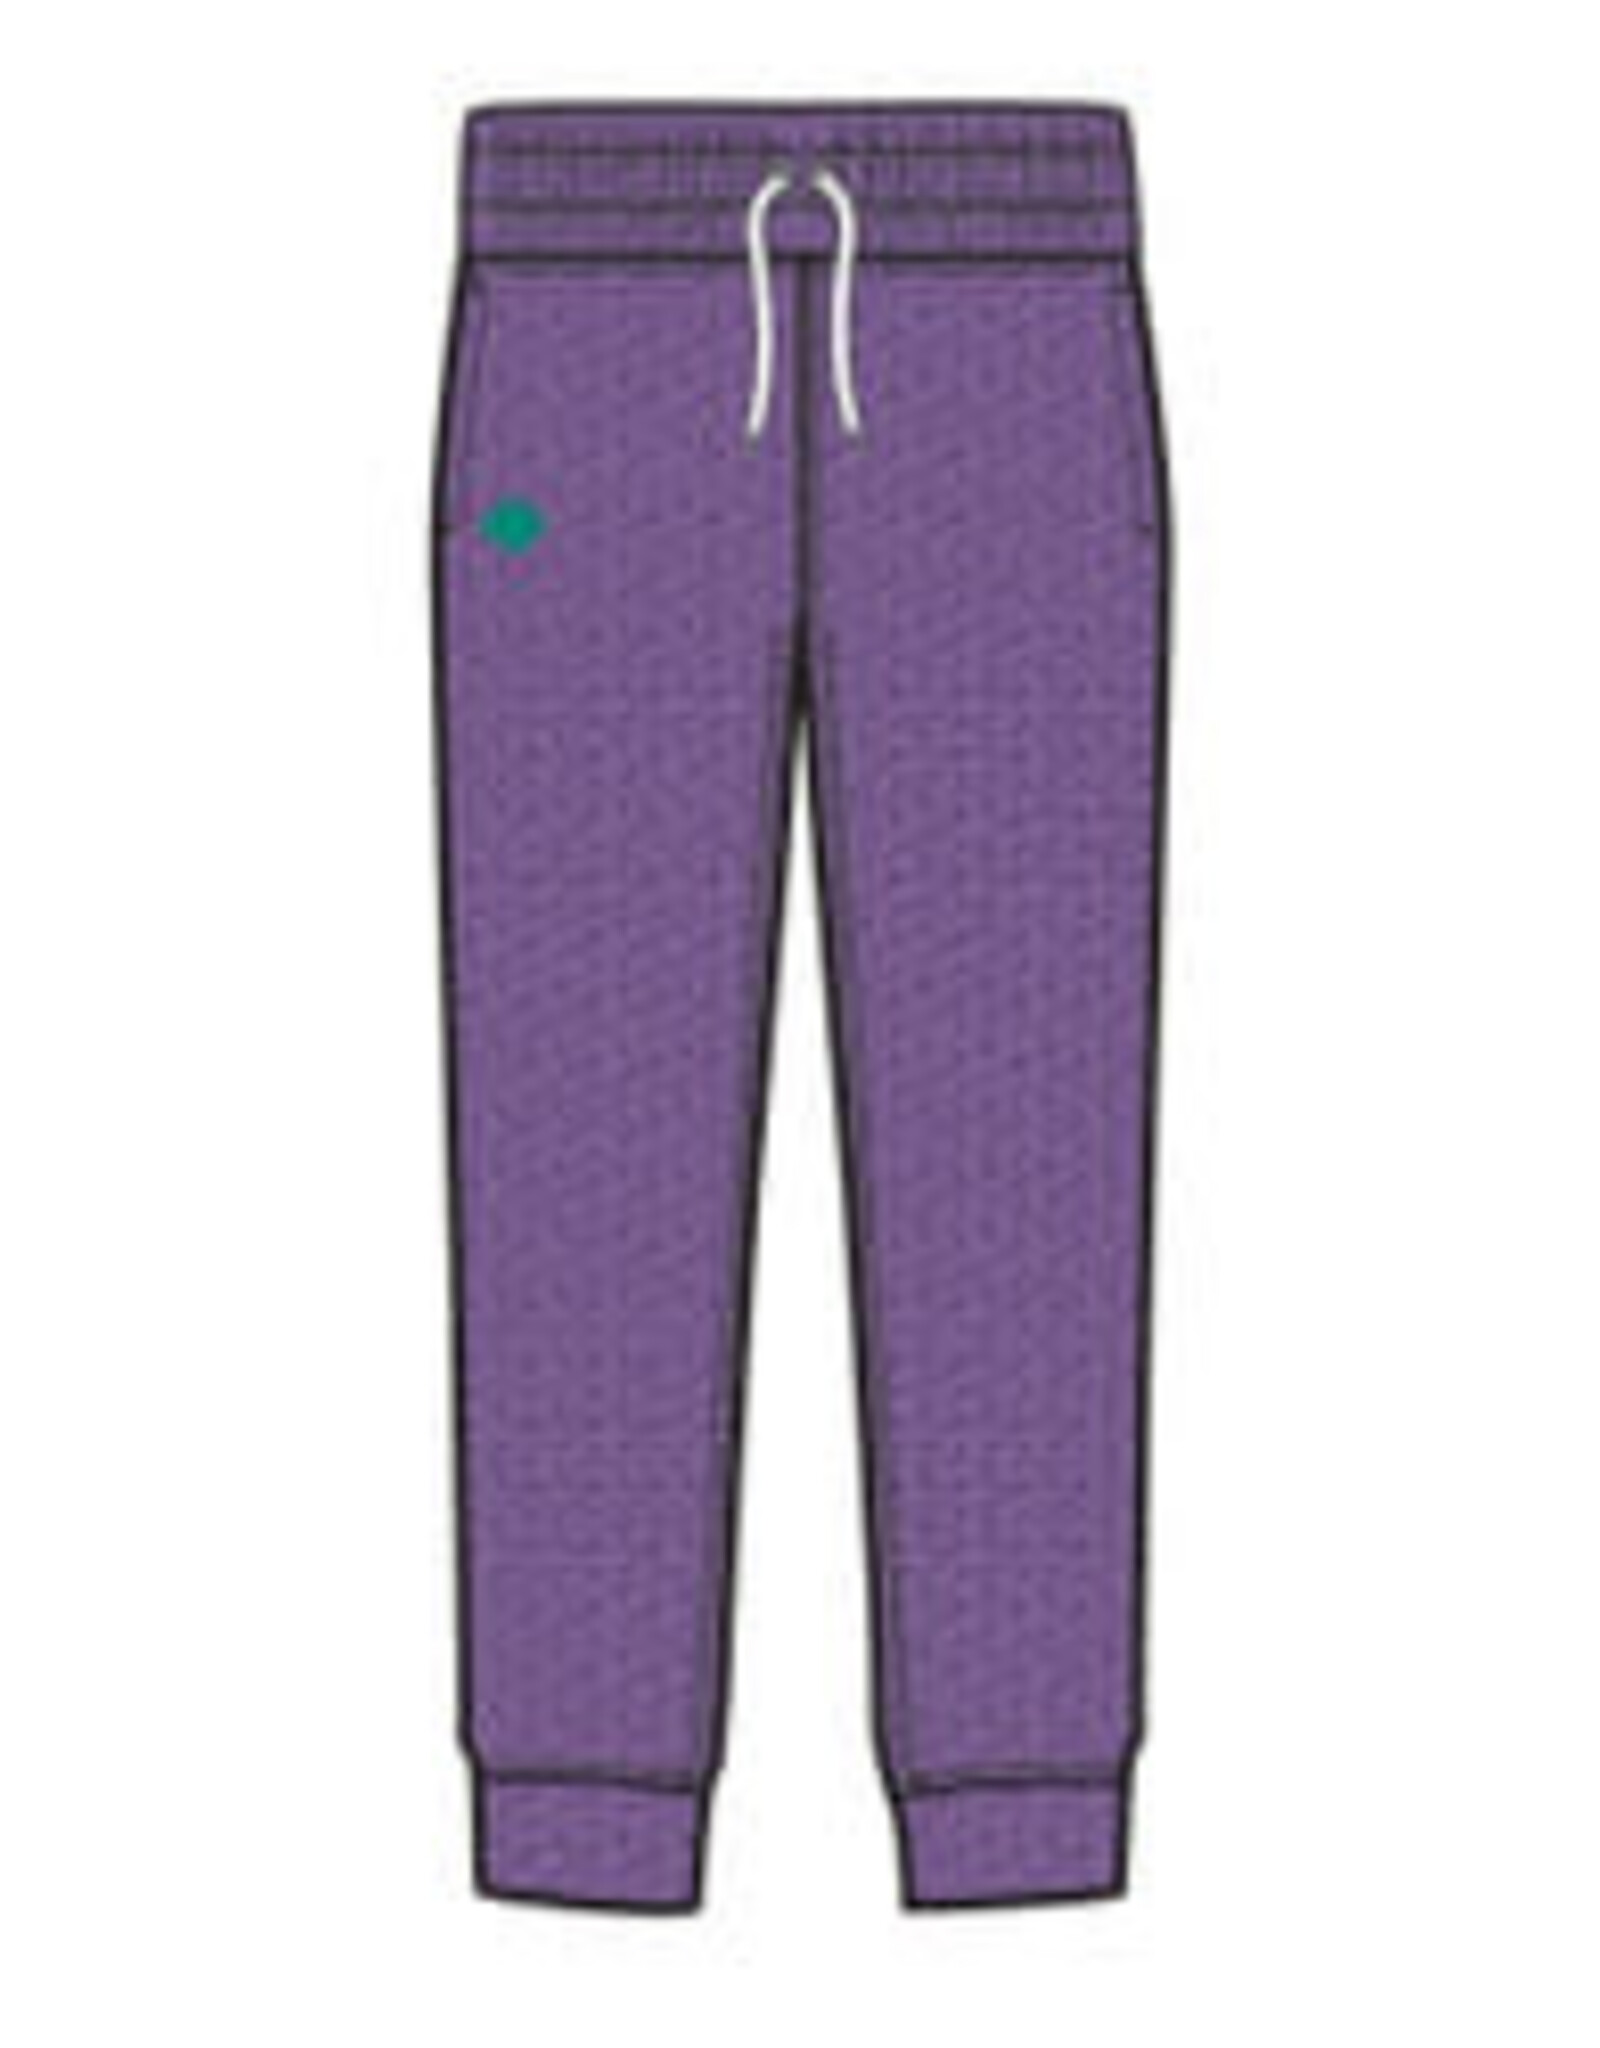 GIRL SCOUTS OF THE USA Junior Track Pants